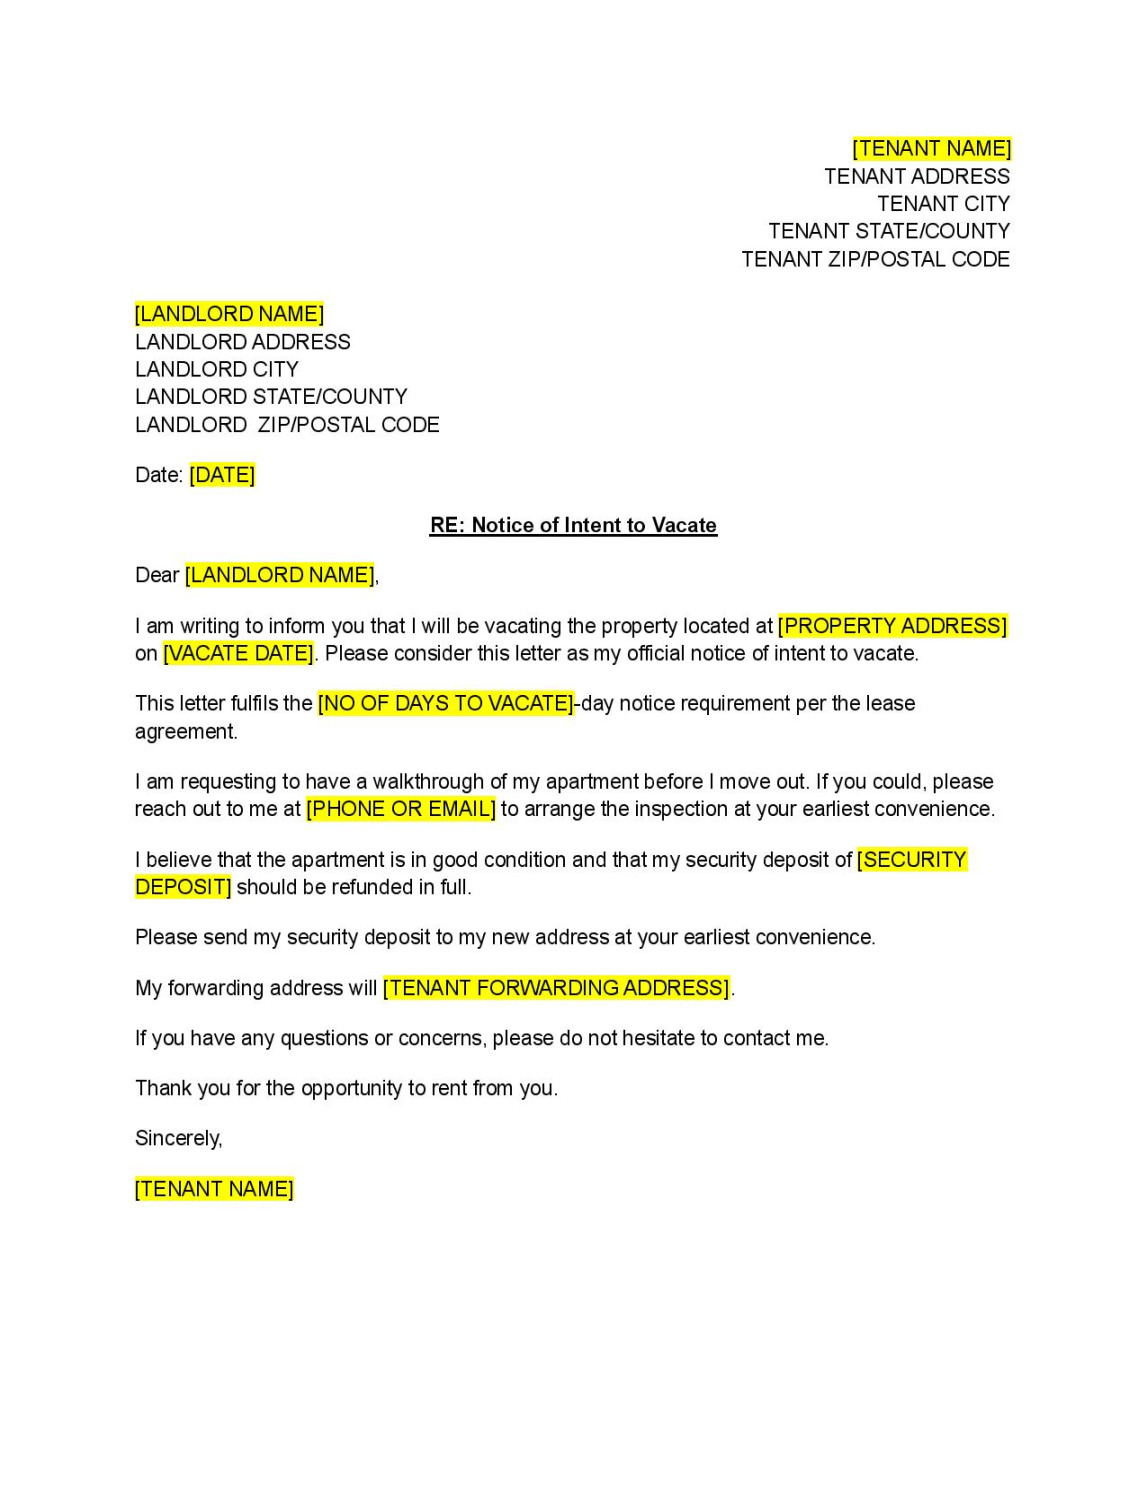 Notice of Intent to Vacate Template - Free Download - Easy Legal Docs